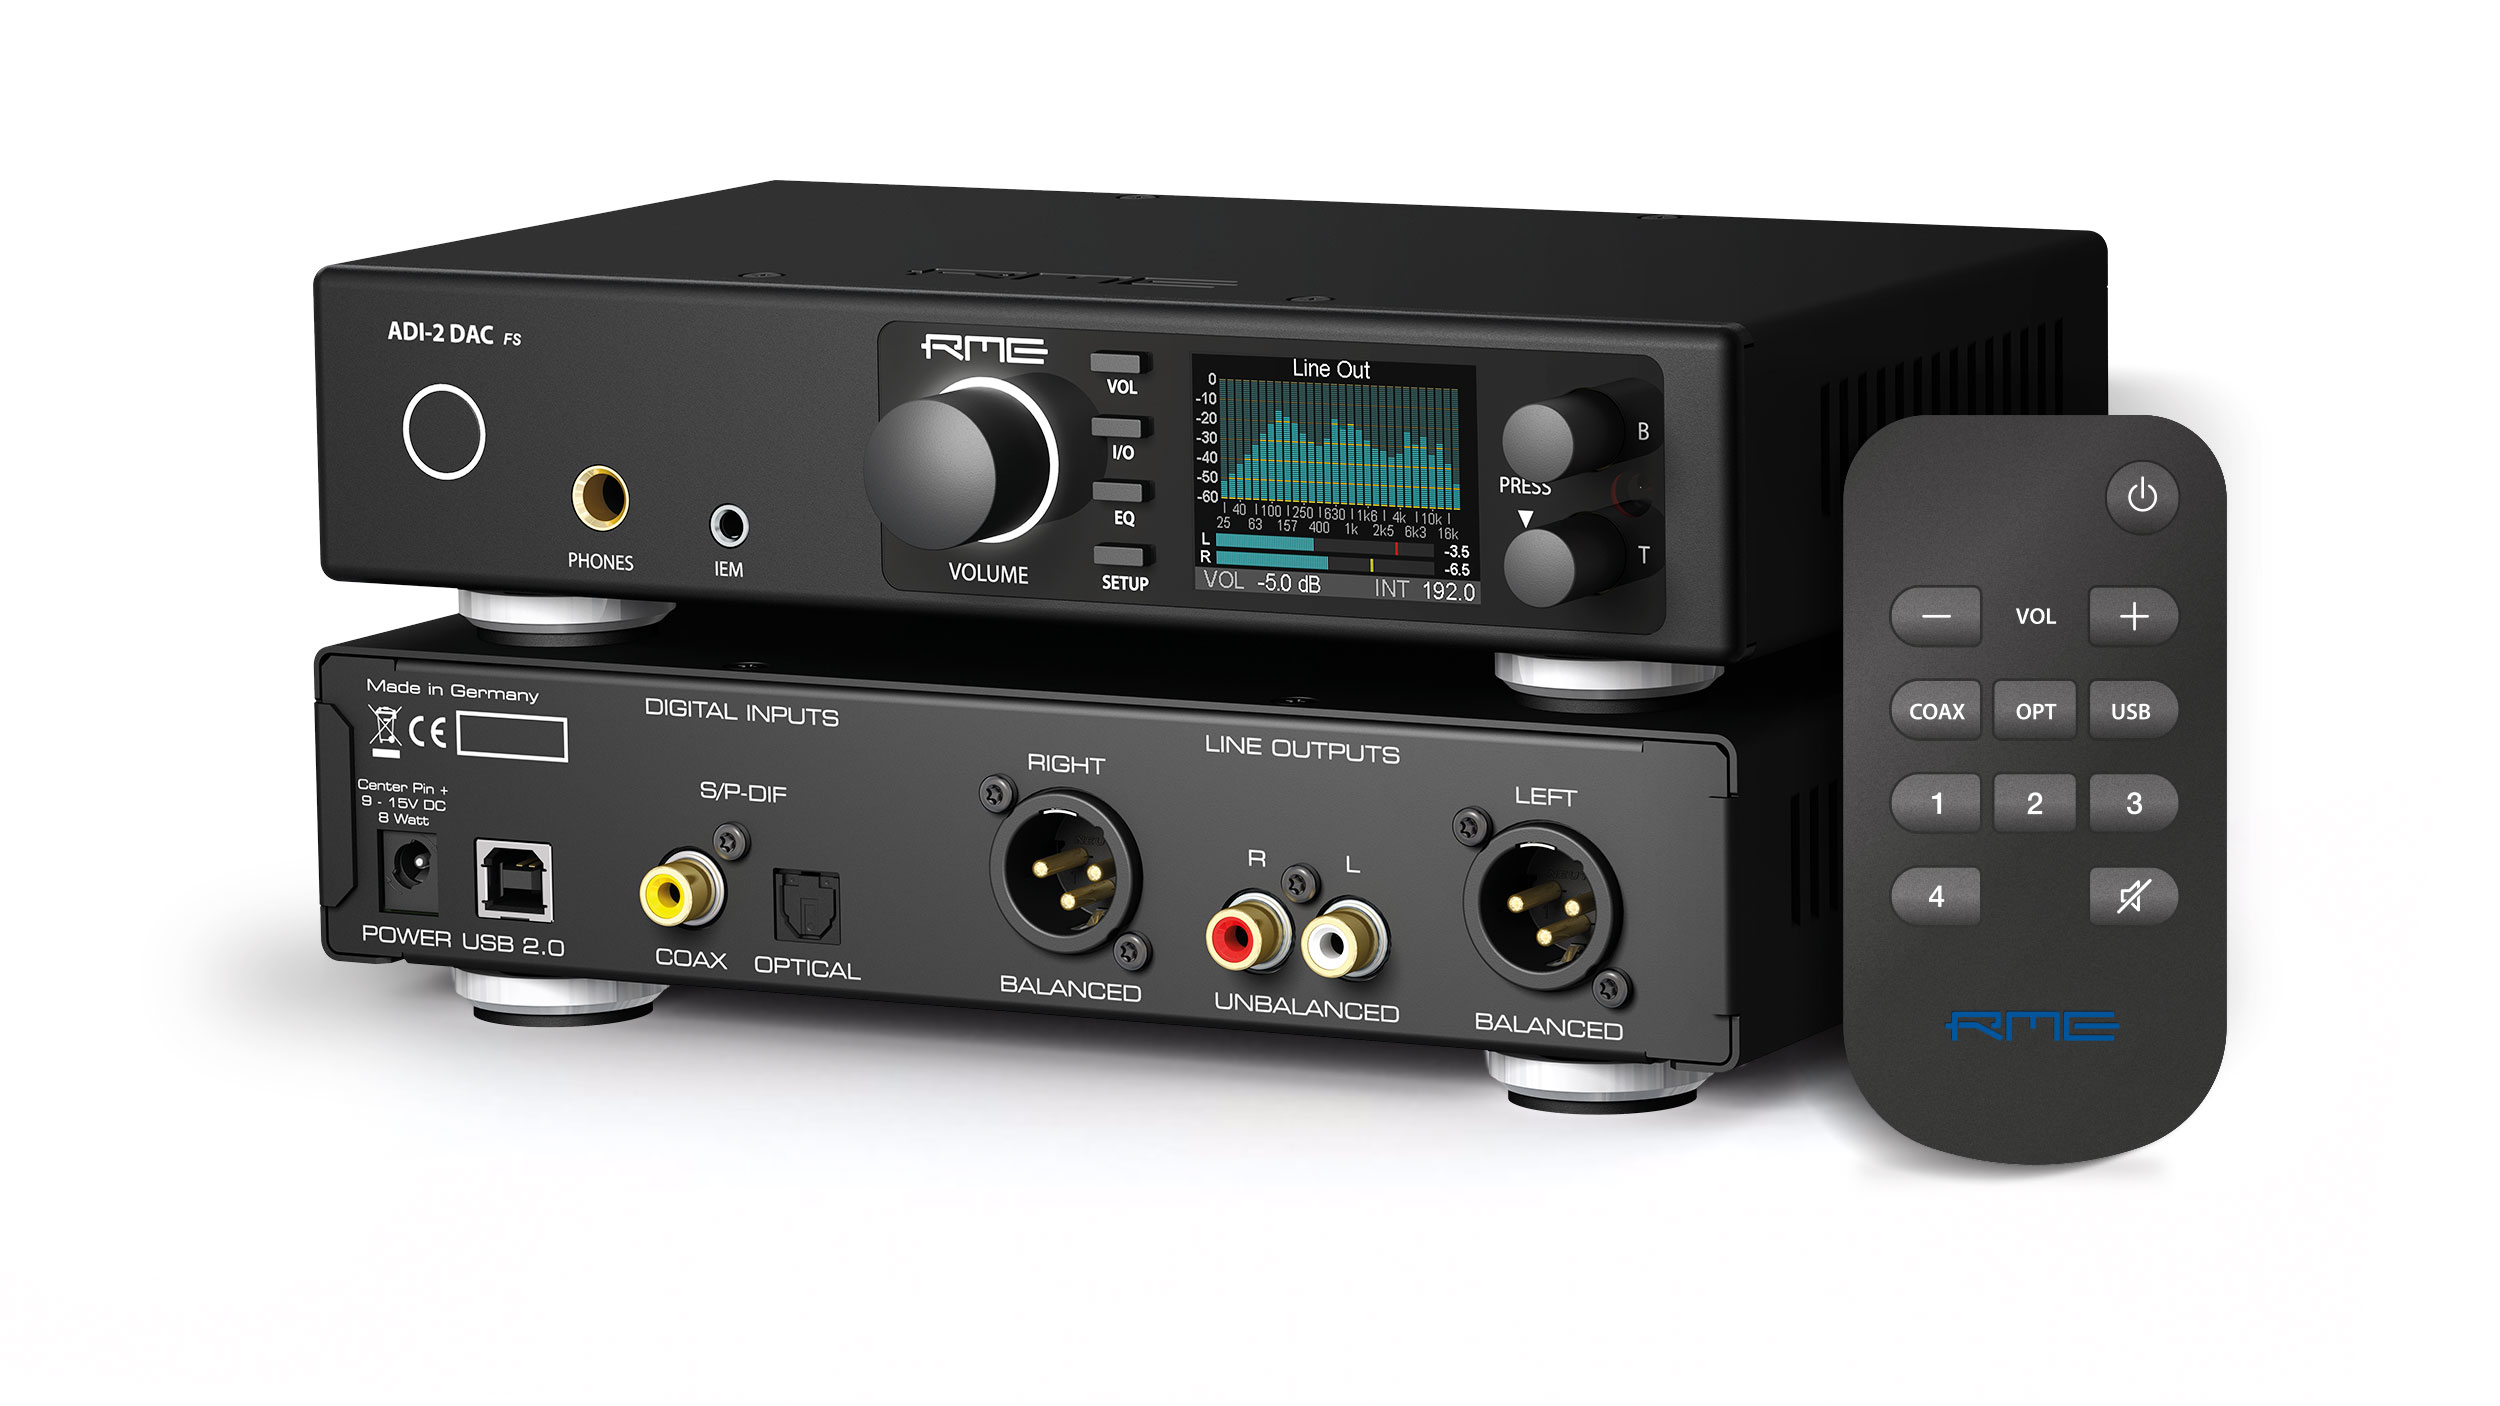 http://www.rme-audio.de/images/products/products_adi-2_dac_1b.jpg